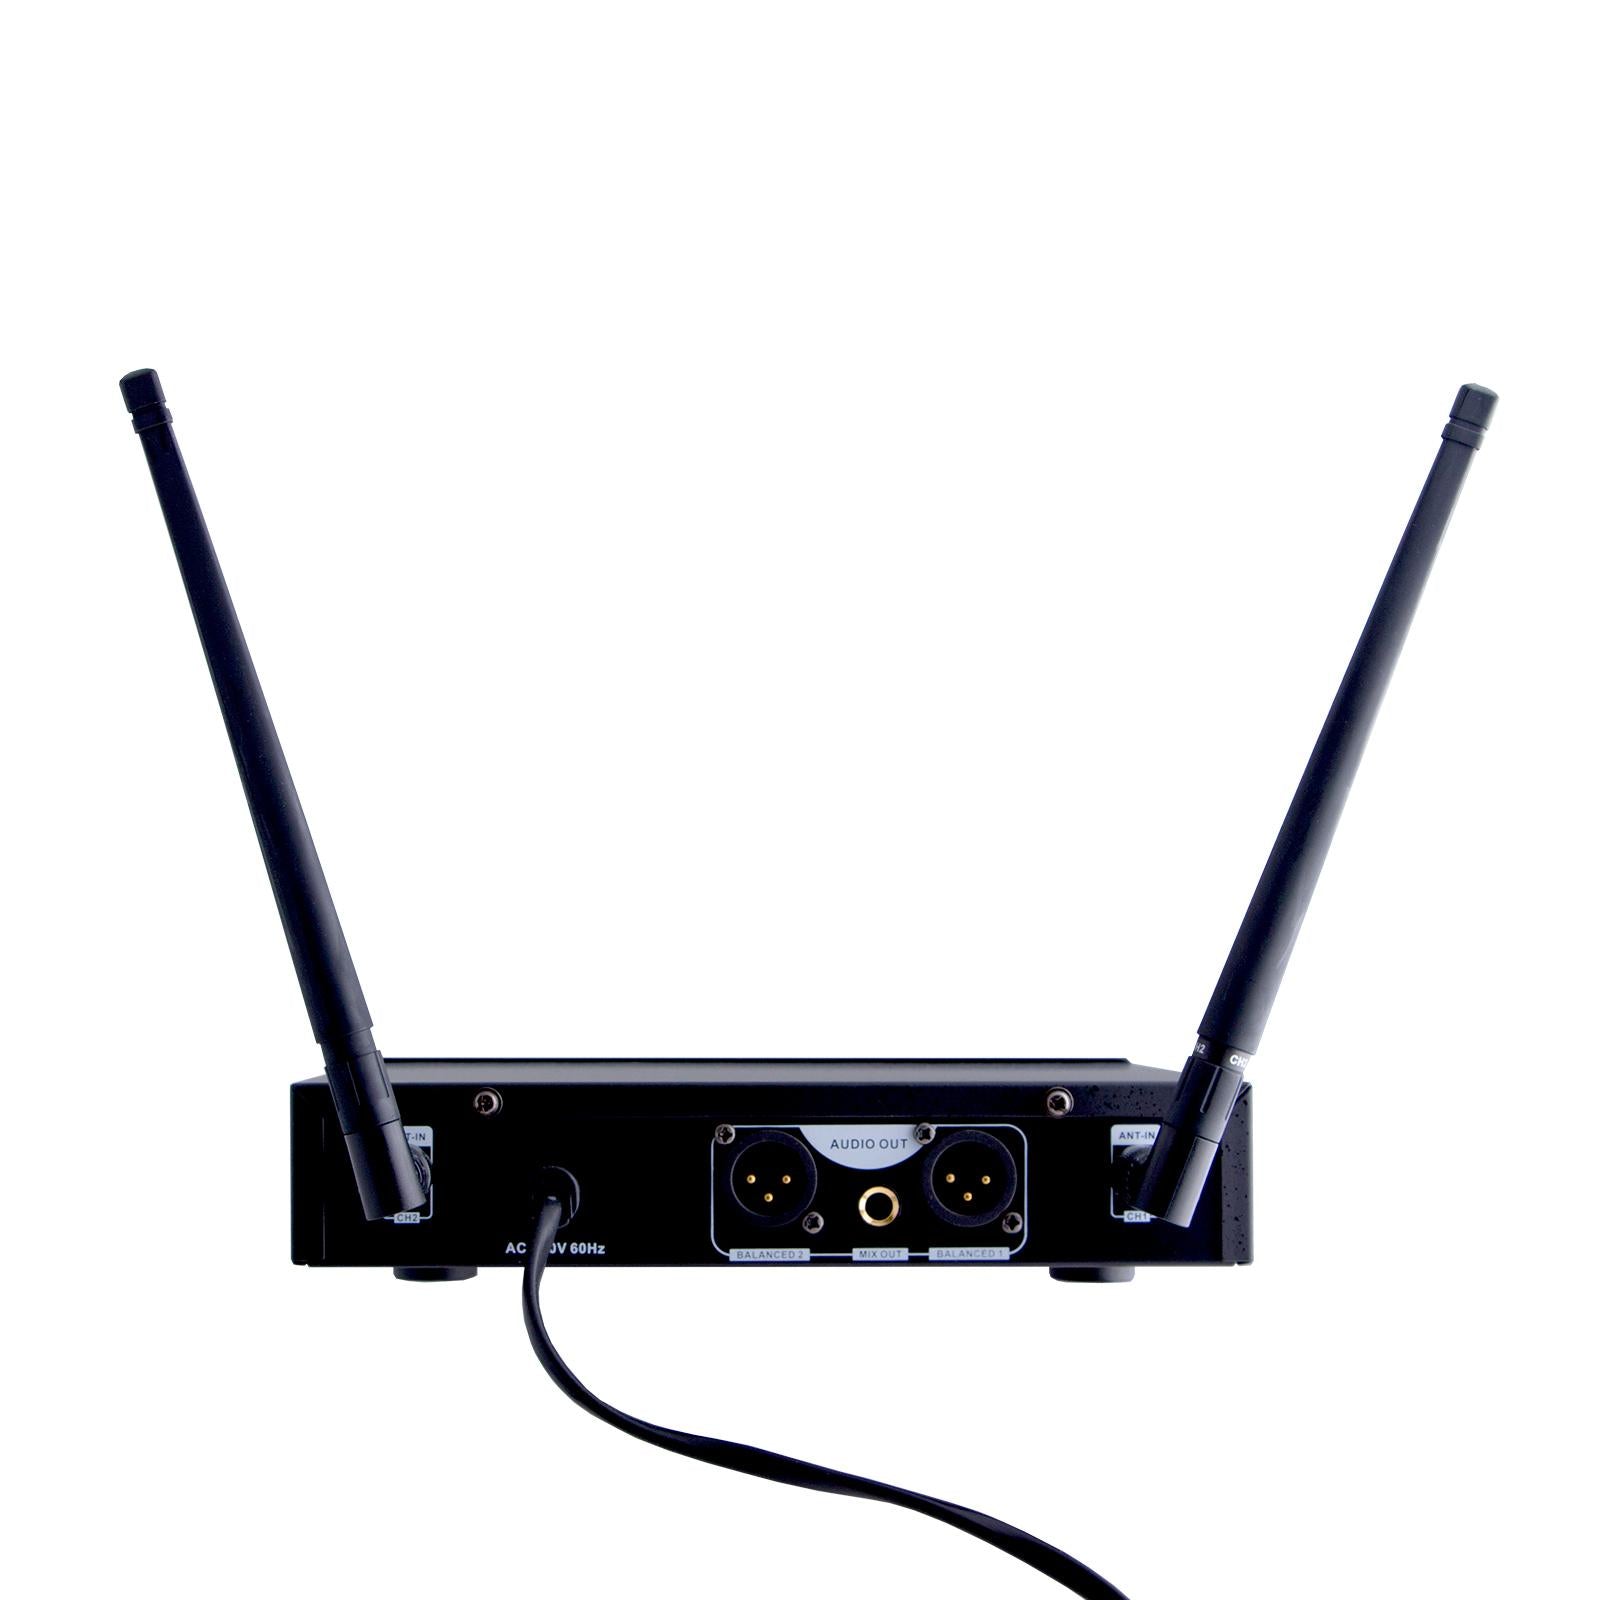 HDM 126D UHF Wireless Dual Microphone System